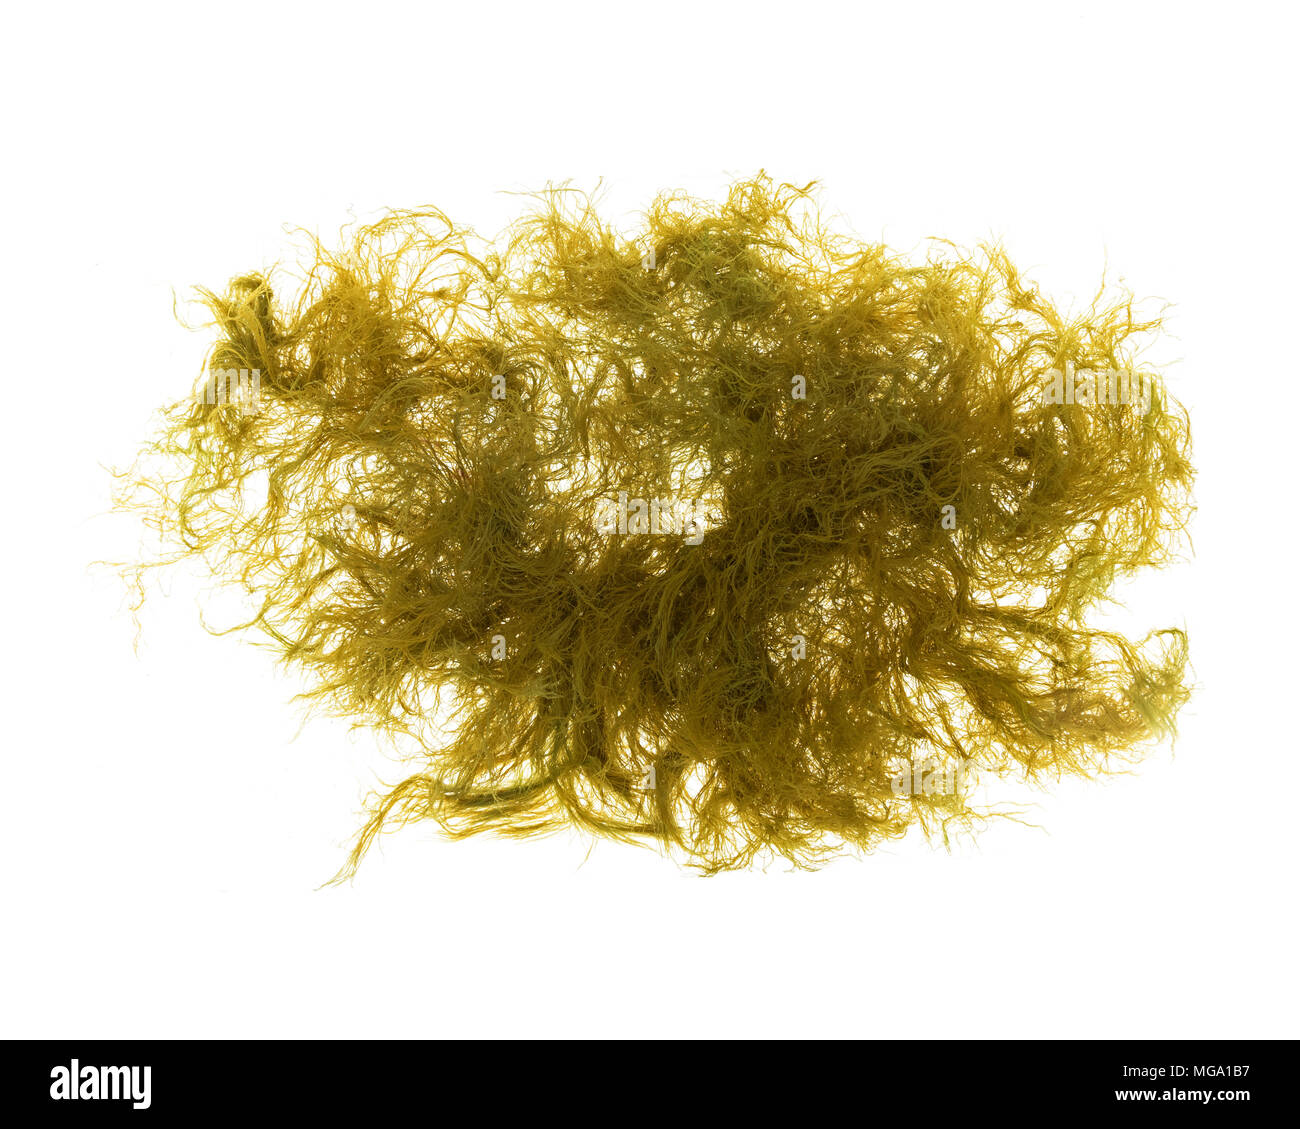 Green algae, probably Cladophora sp., floating in water on a white background. Stock Photo